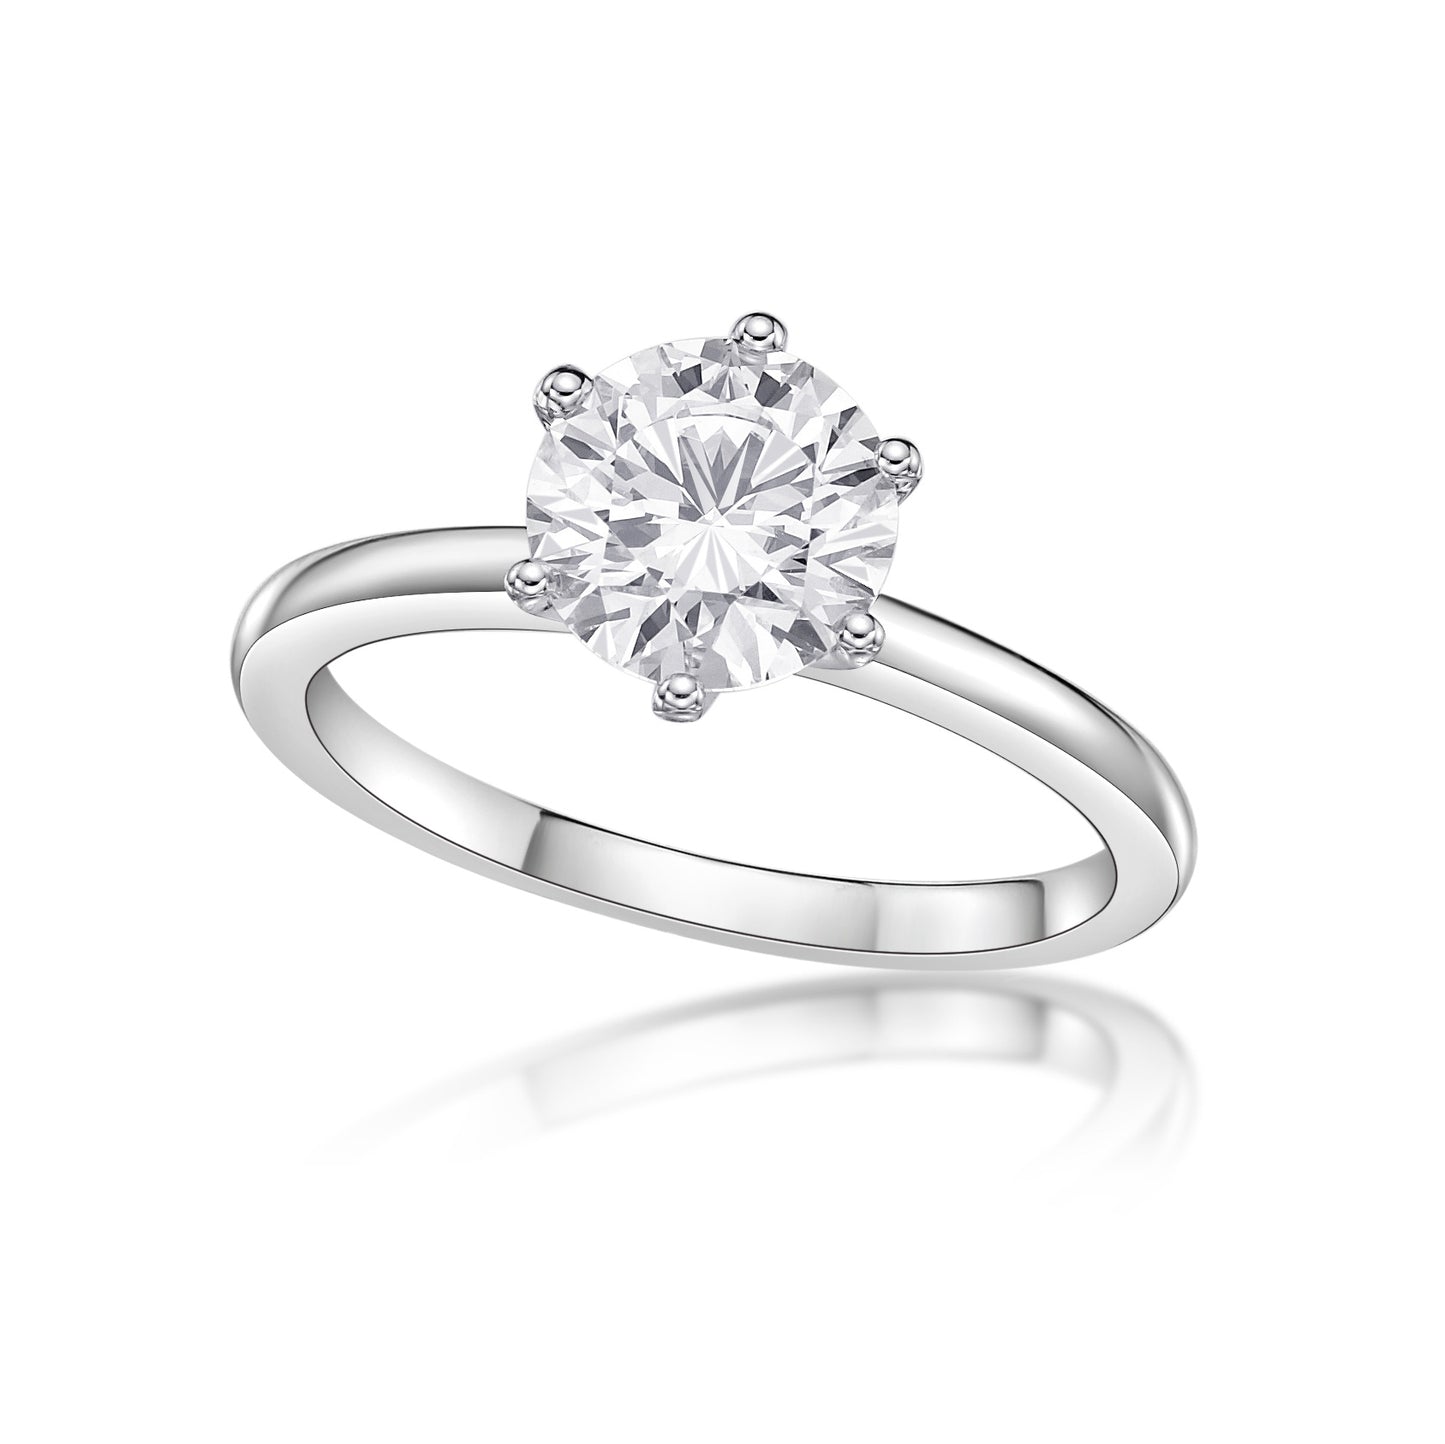 Classic 6-claw Crown Solitaire set with 1.32ct Round Brilliant diamonds, micropave diamond detailing on crown